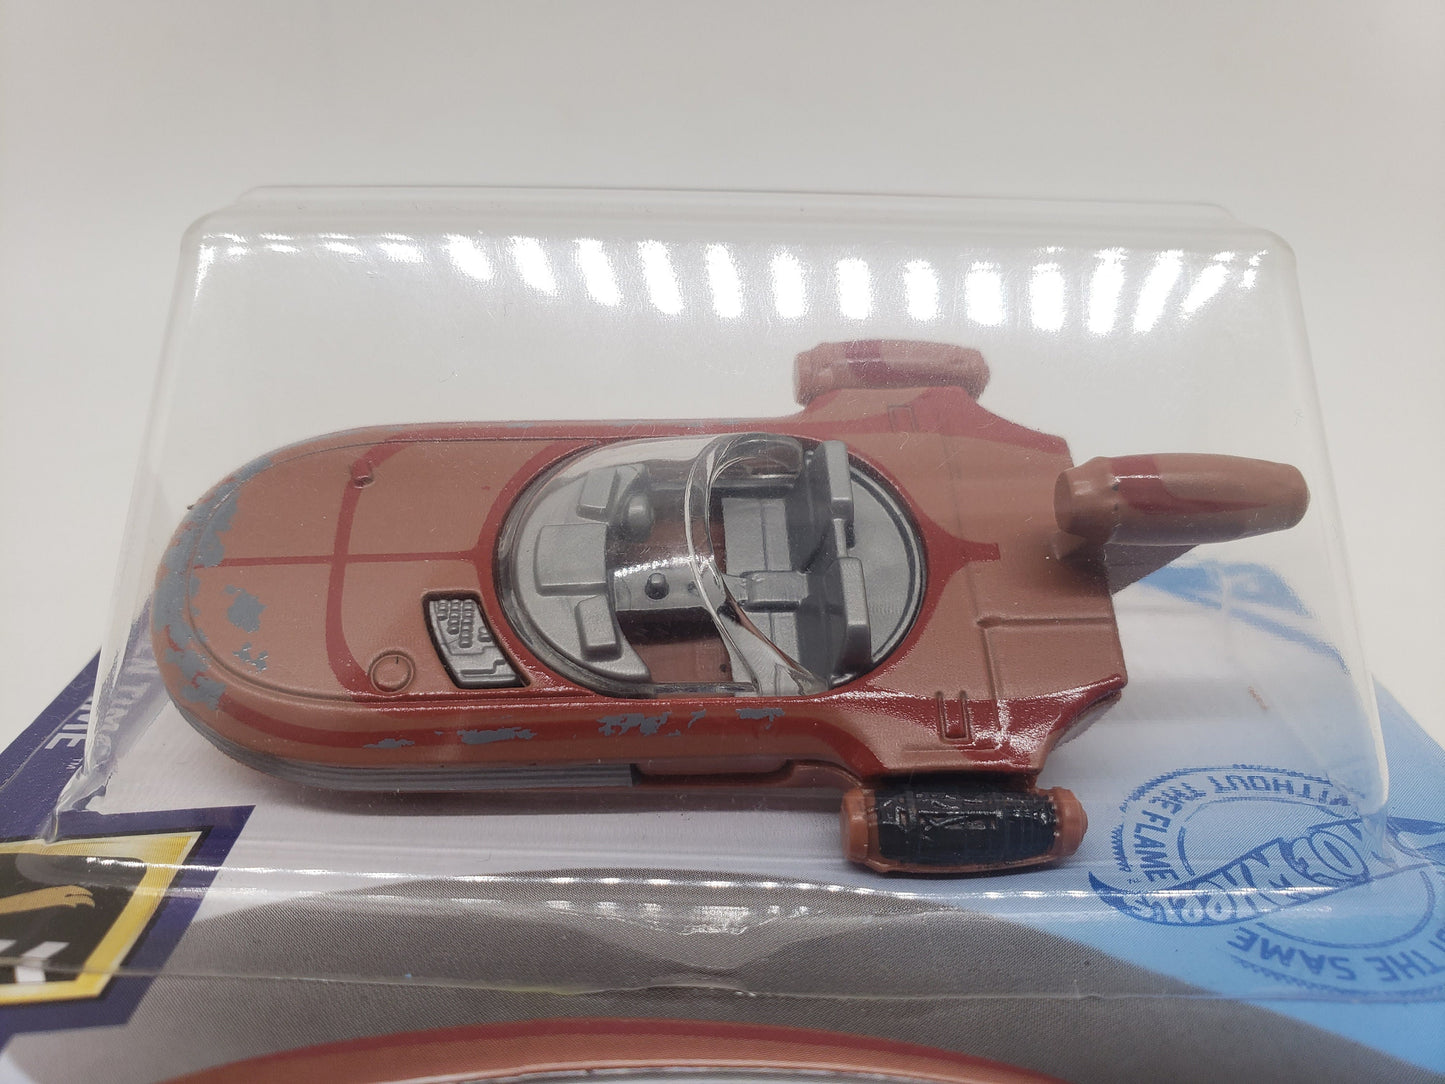 Hot Wheels Star Wars X-34 Landspeeder Brown HW Screen Time Perfect Birthday Gift Miniature Collectable Model Toy Car